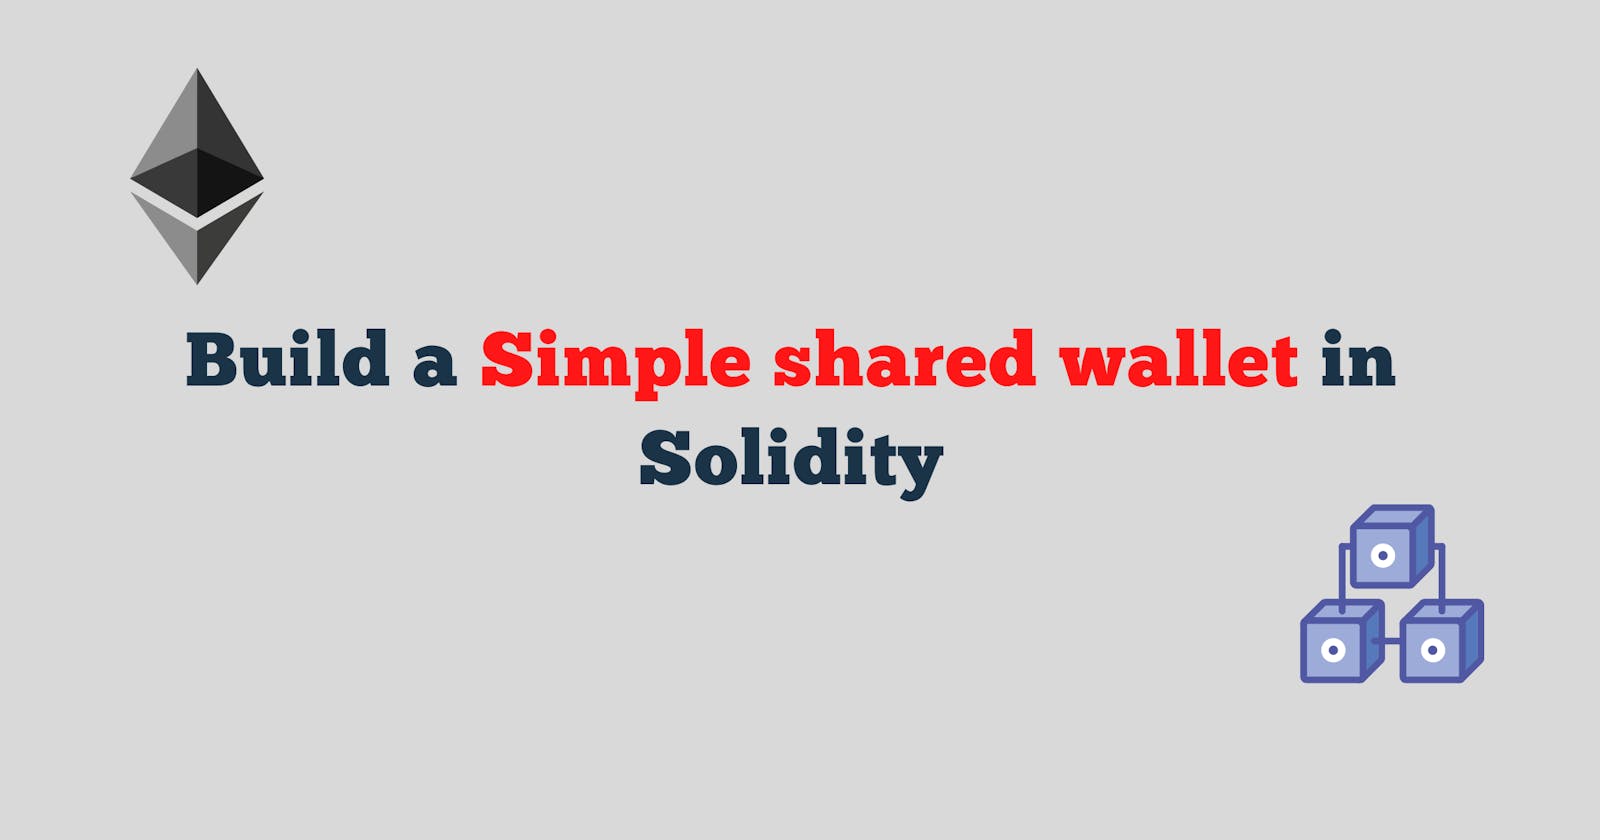 Build a Simple Shared Wallet in Solidity